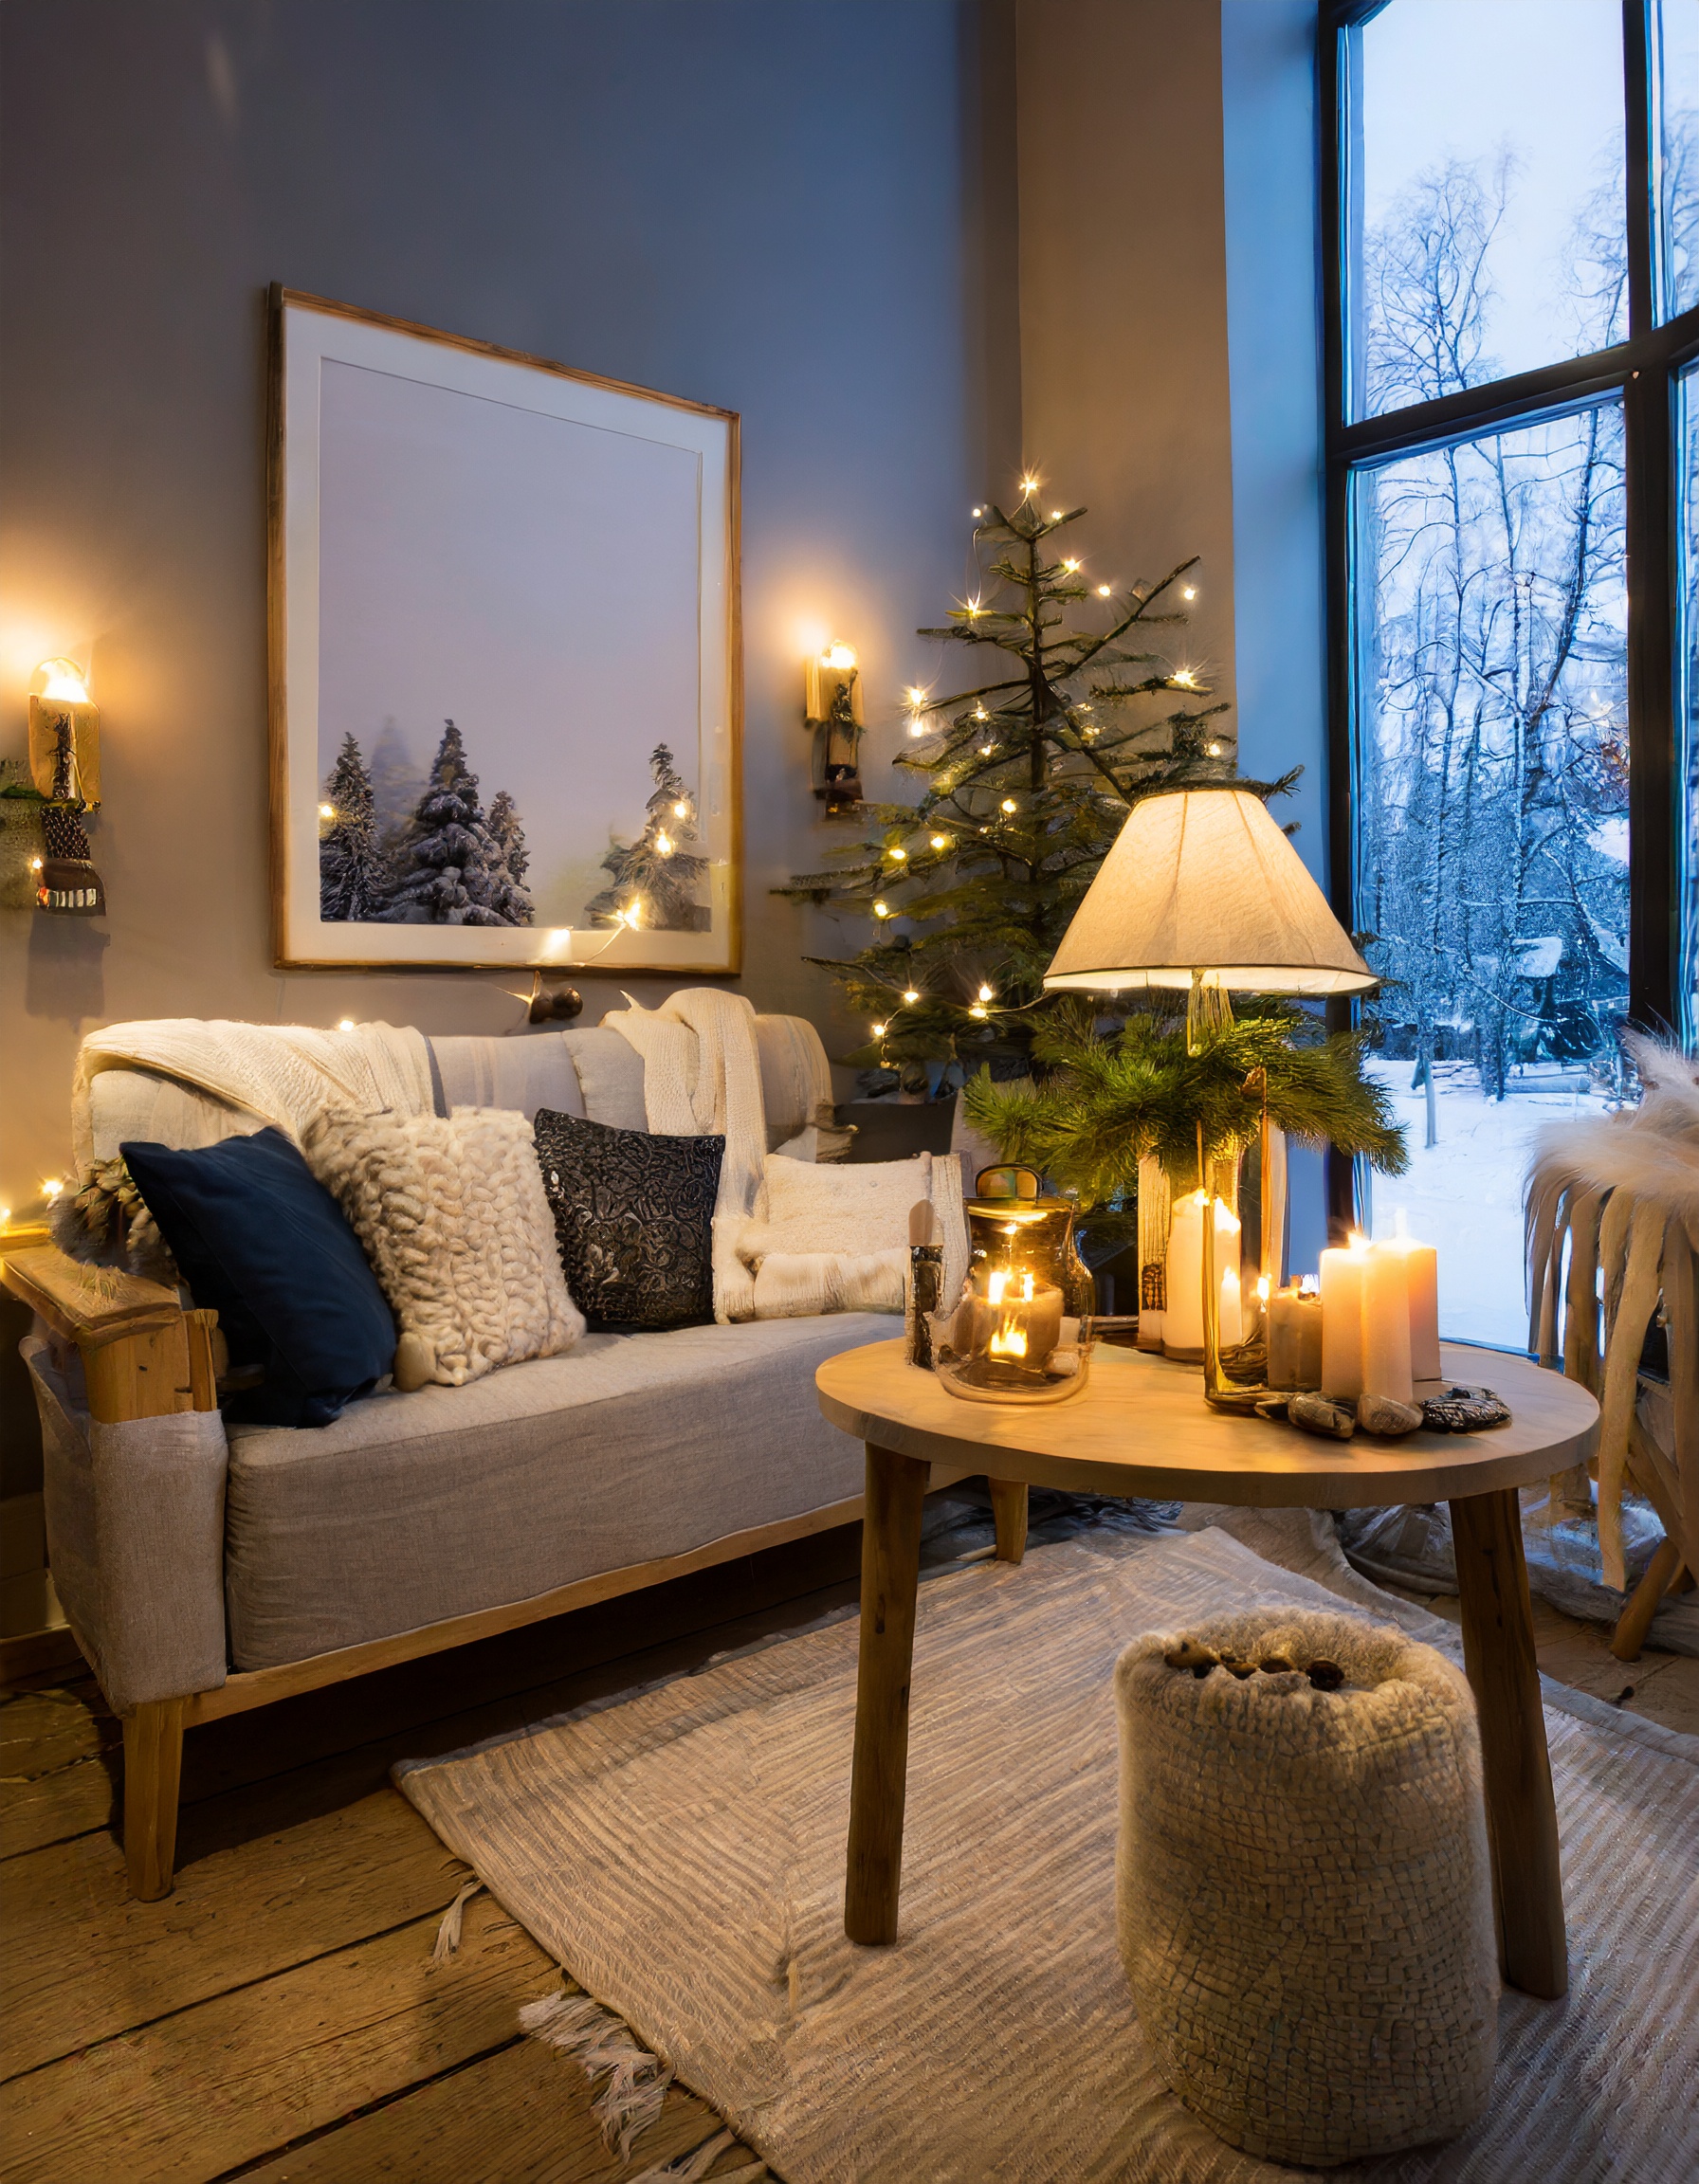 How to hygge: Learn the Scandinavian art of getting cozy at home